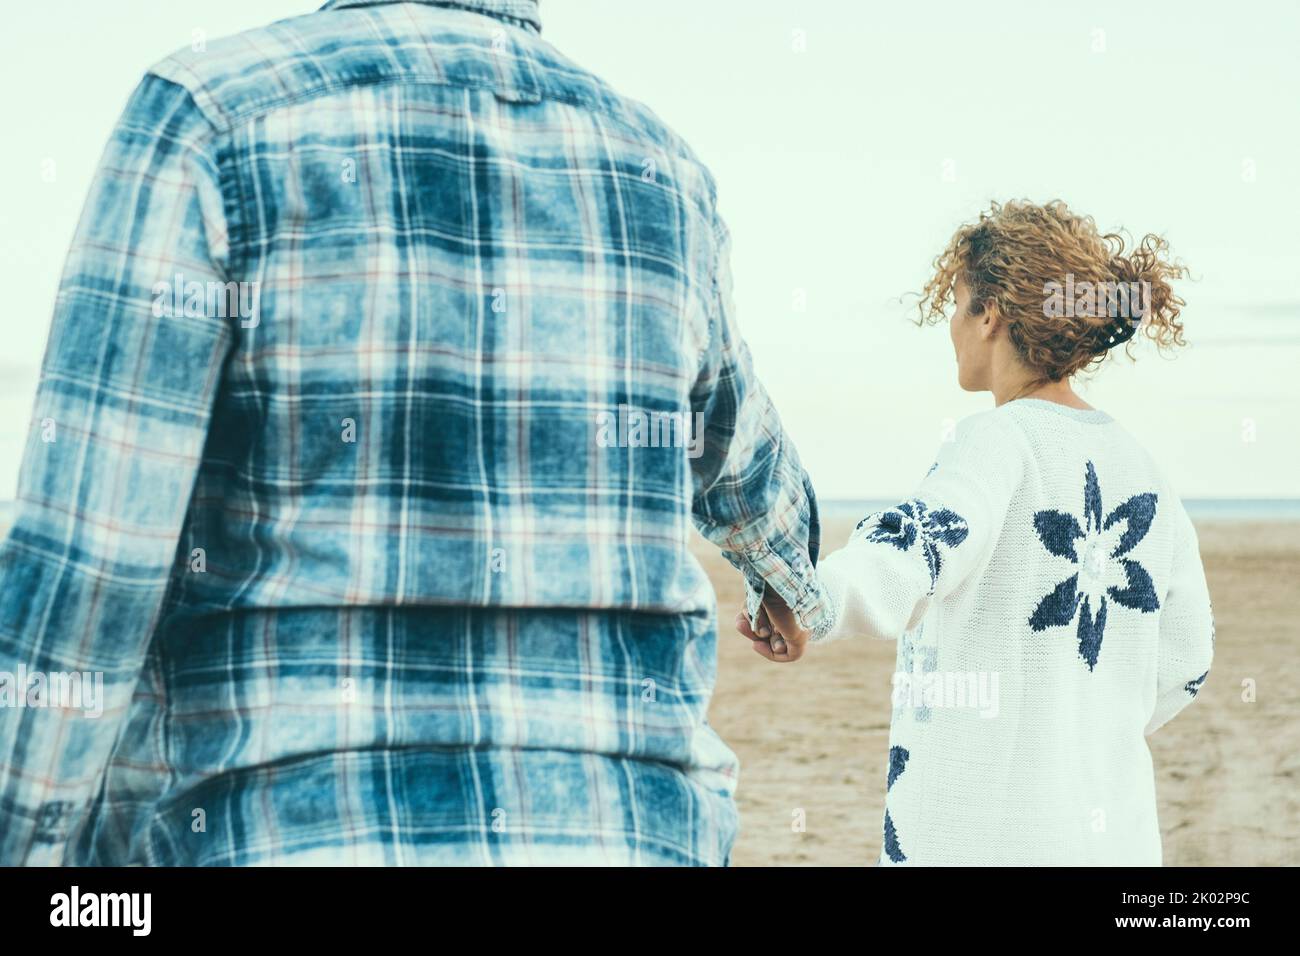 Couple summer vacation travel - Woman walking on romantic honeymoon beach holidays holding hand of boyfriend or husband following her, view from behind. POV. Outdoor leisure together Stock Photo